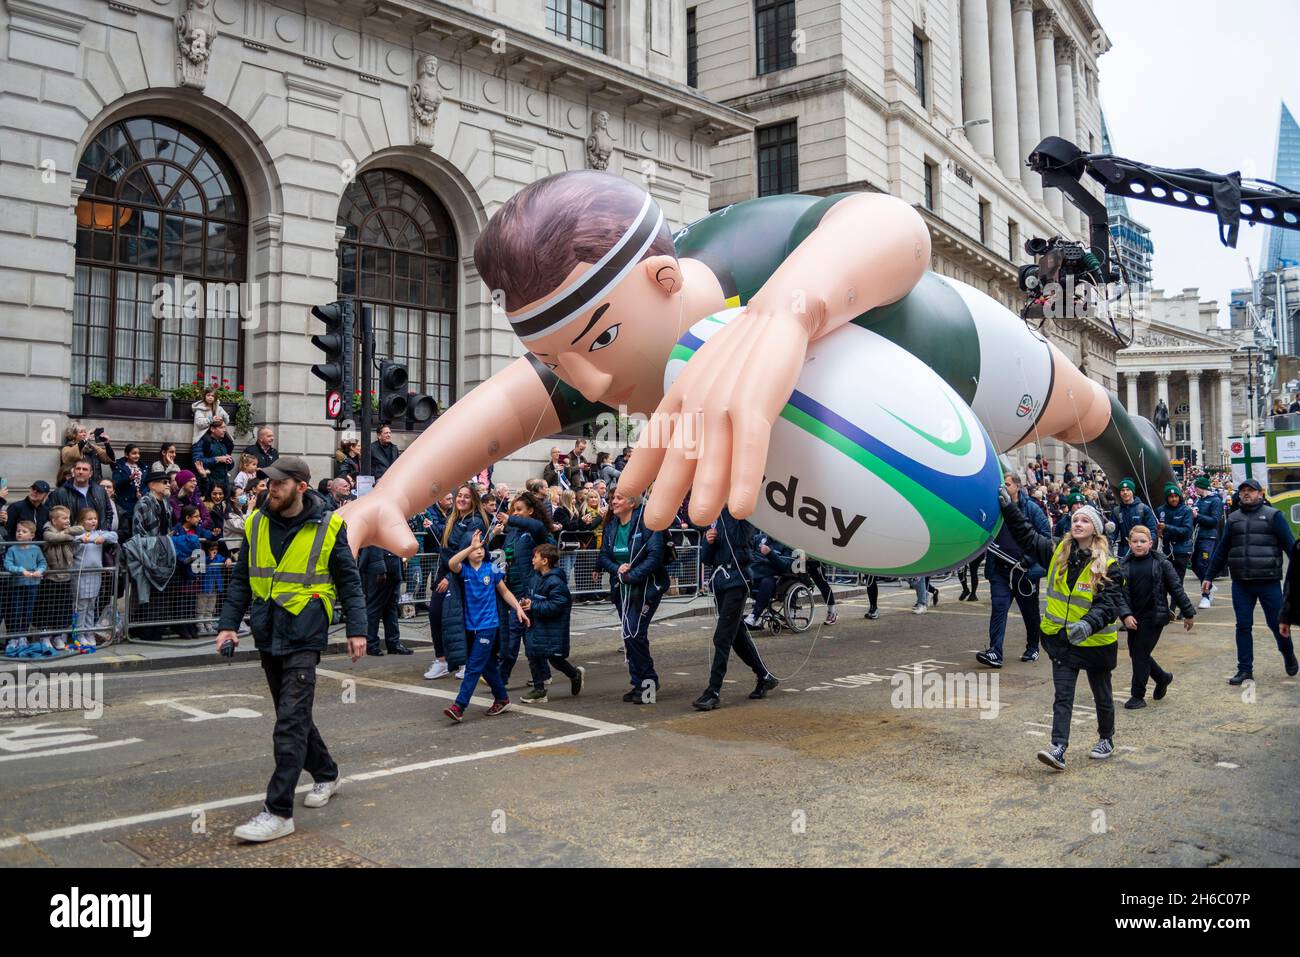 POWERDAY, LONDON IRISH RUGBY CLUB float at the Lord Mayor's Show, Parade, procession passing along Poultry, near Mansion House, London, UK Stock Photo